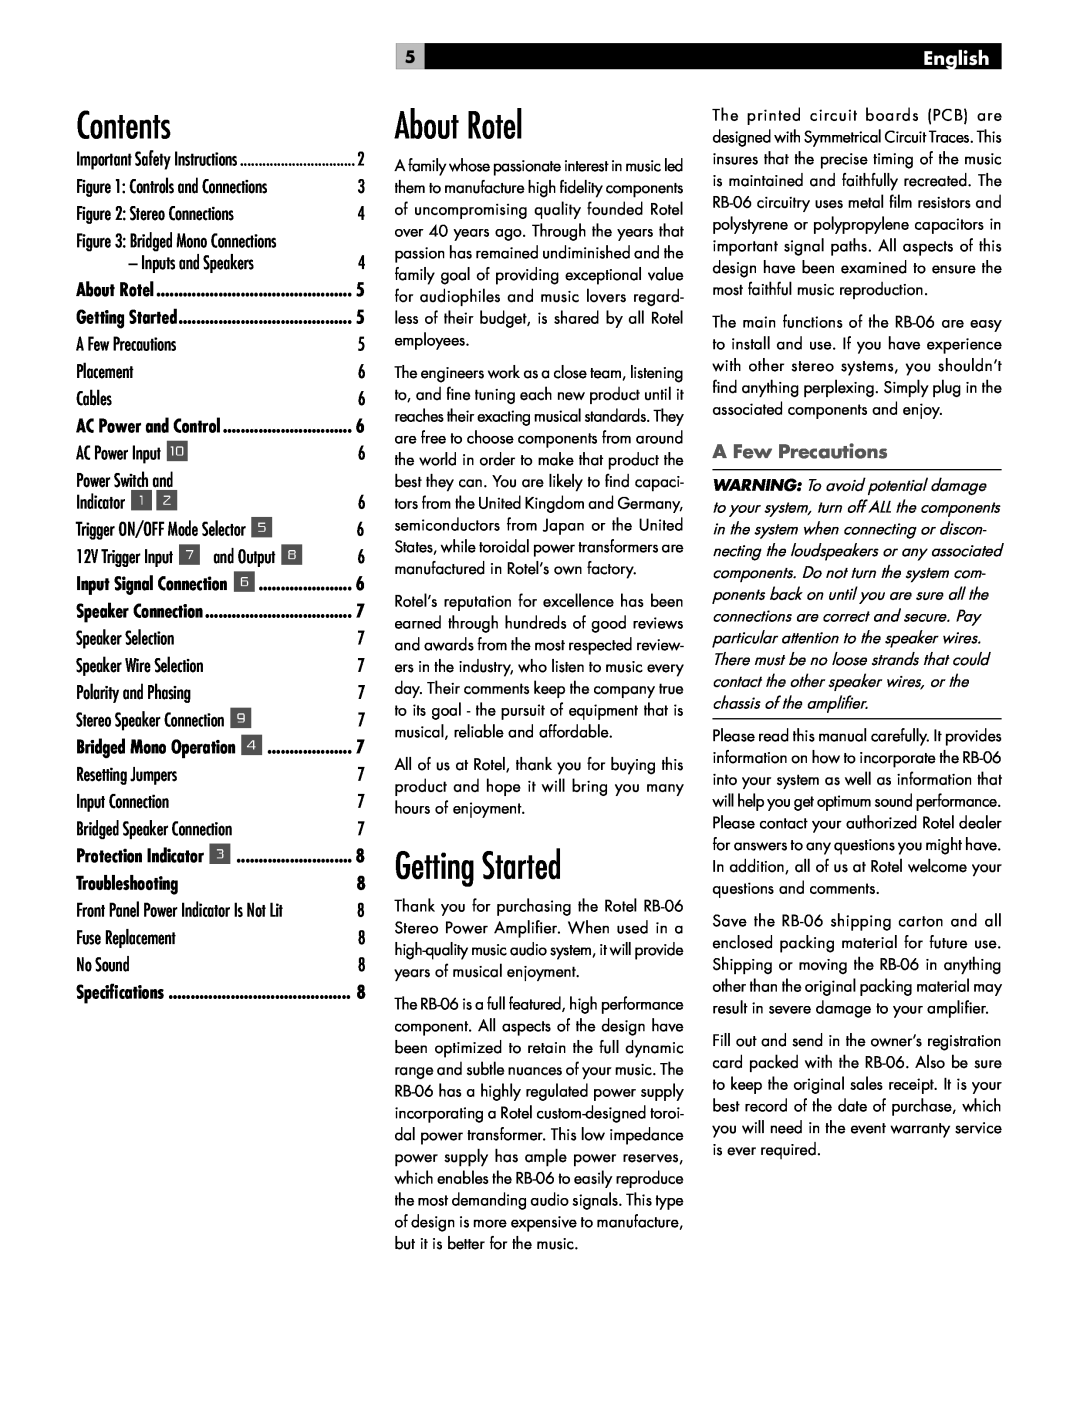 Rotel RB-06 owner manual Contents, About Rotel, Getting Started, A Few Precautions, English 